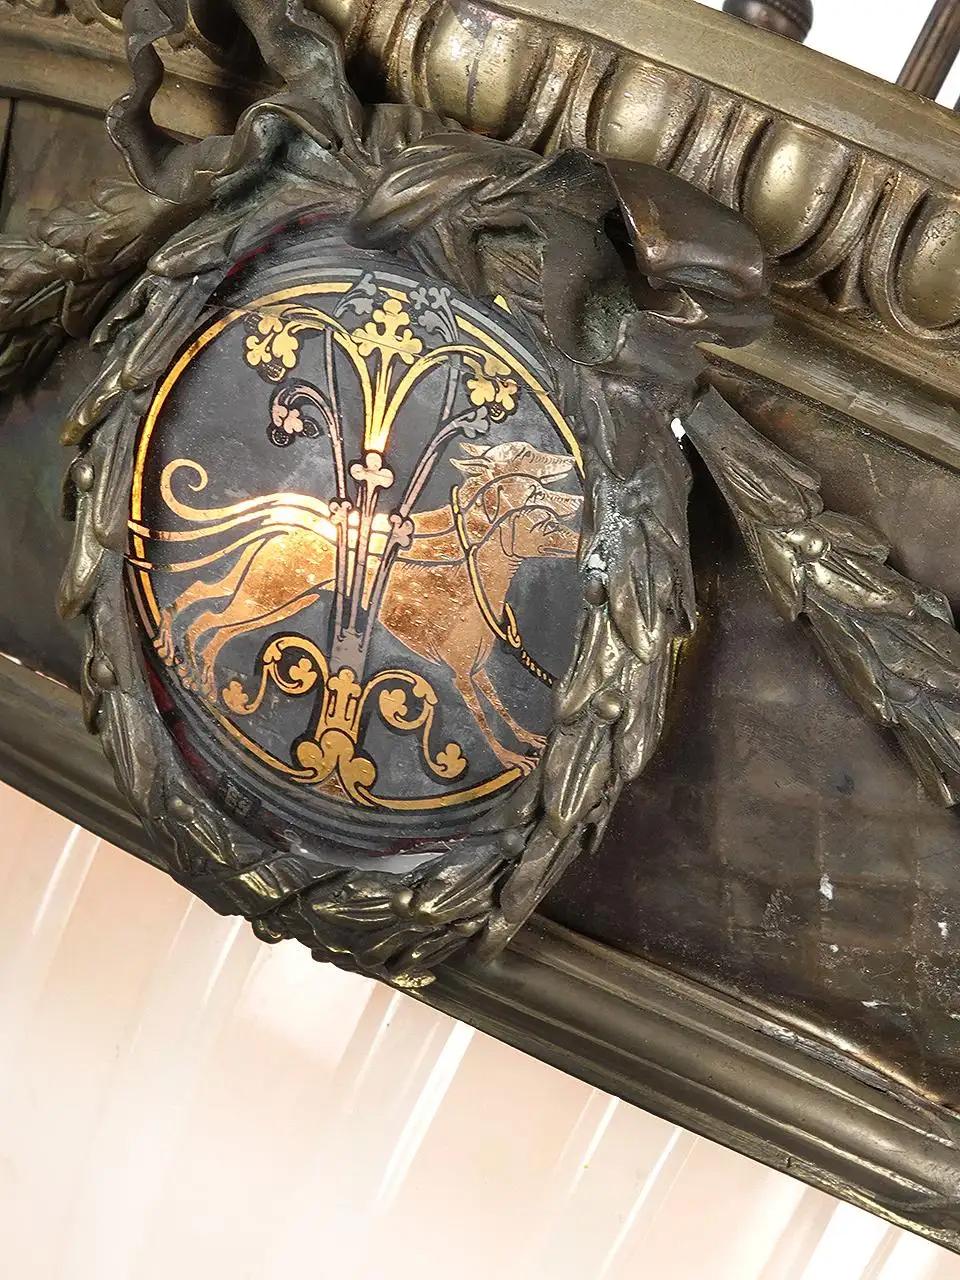 The lamp is early 20th century European. The Unicorn painted glass medallions are British Monarchy and read Mon Droit... My Right. One of the 4 pieces of glass is different and must have been replaced at some time. It shows 2 dogs. The main bronze